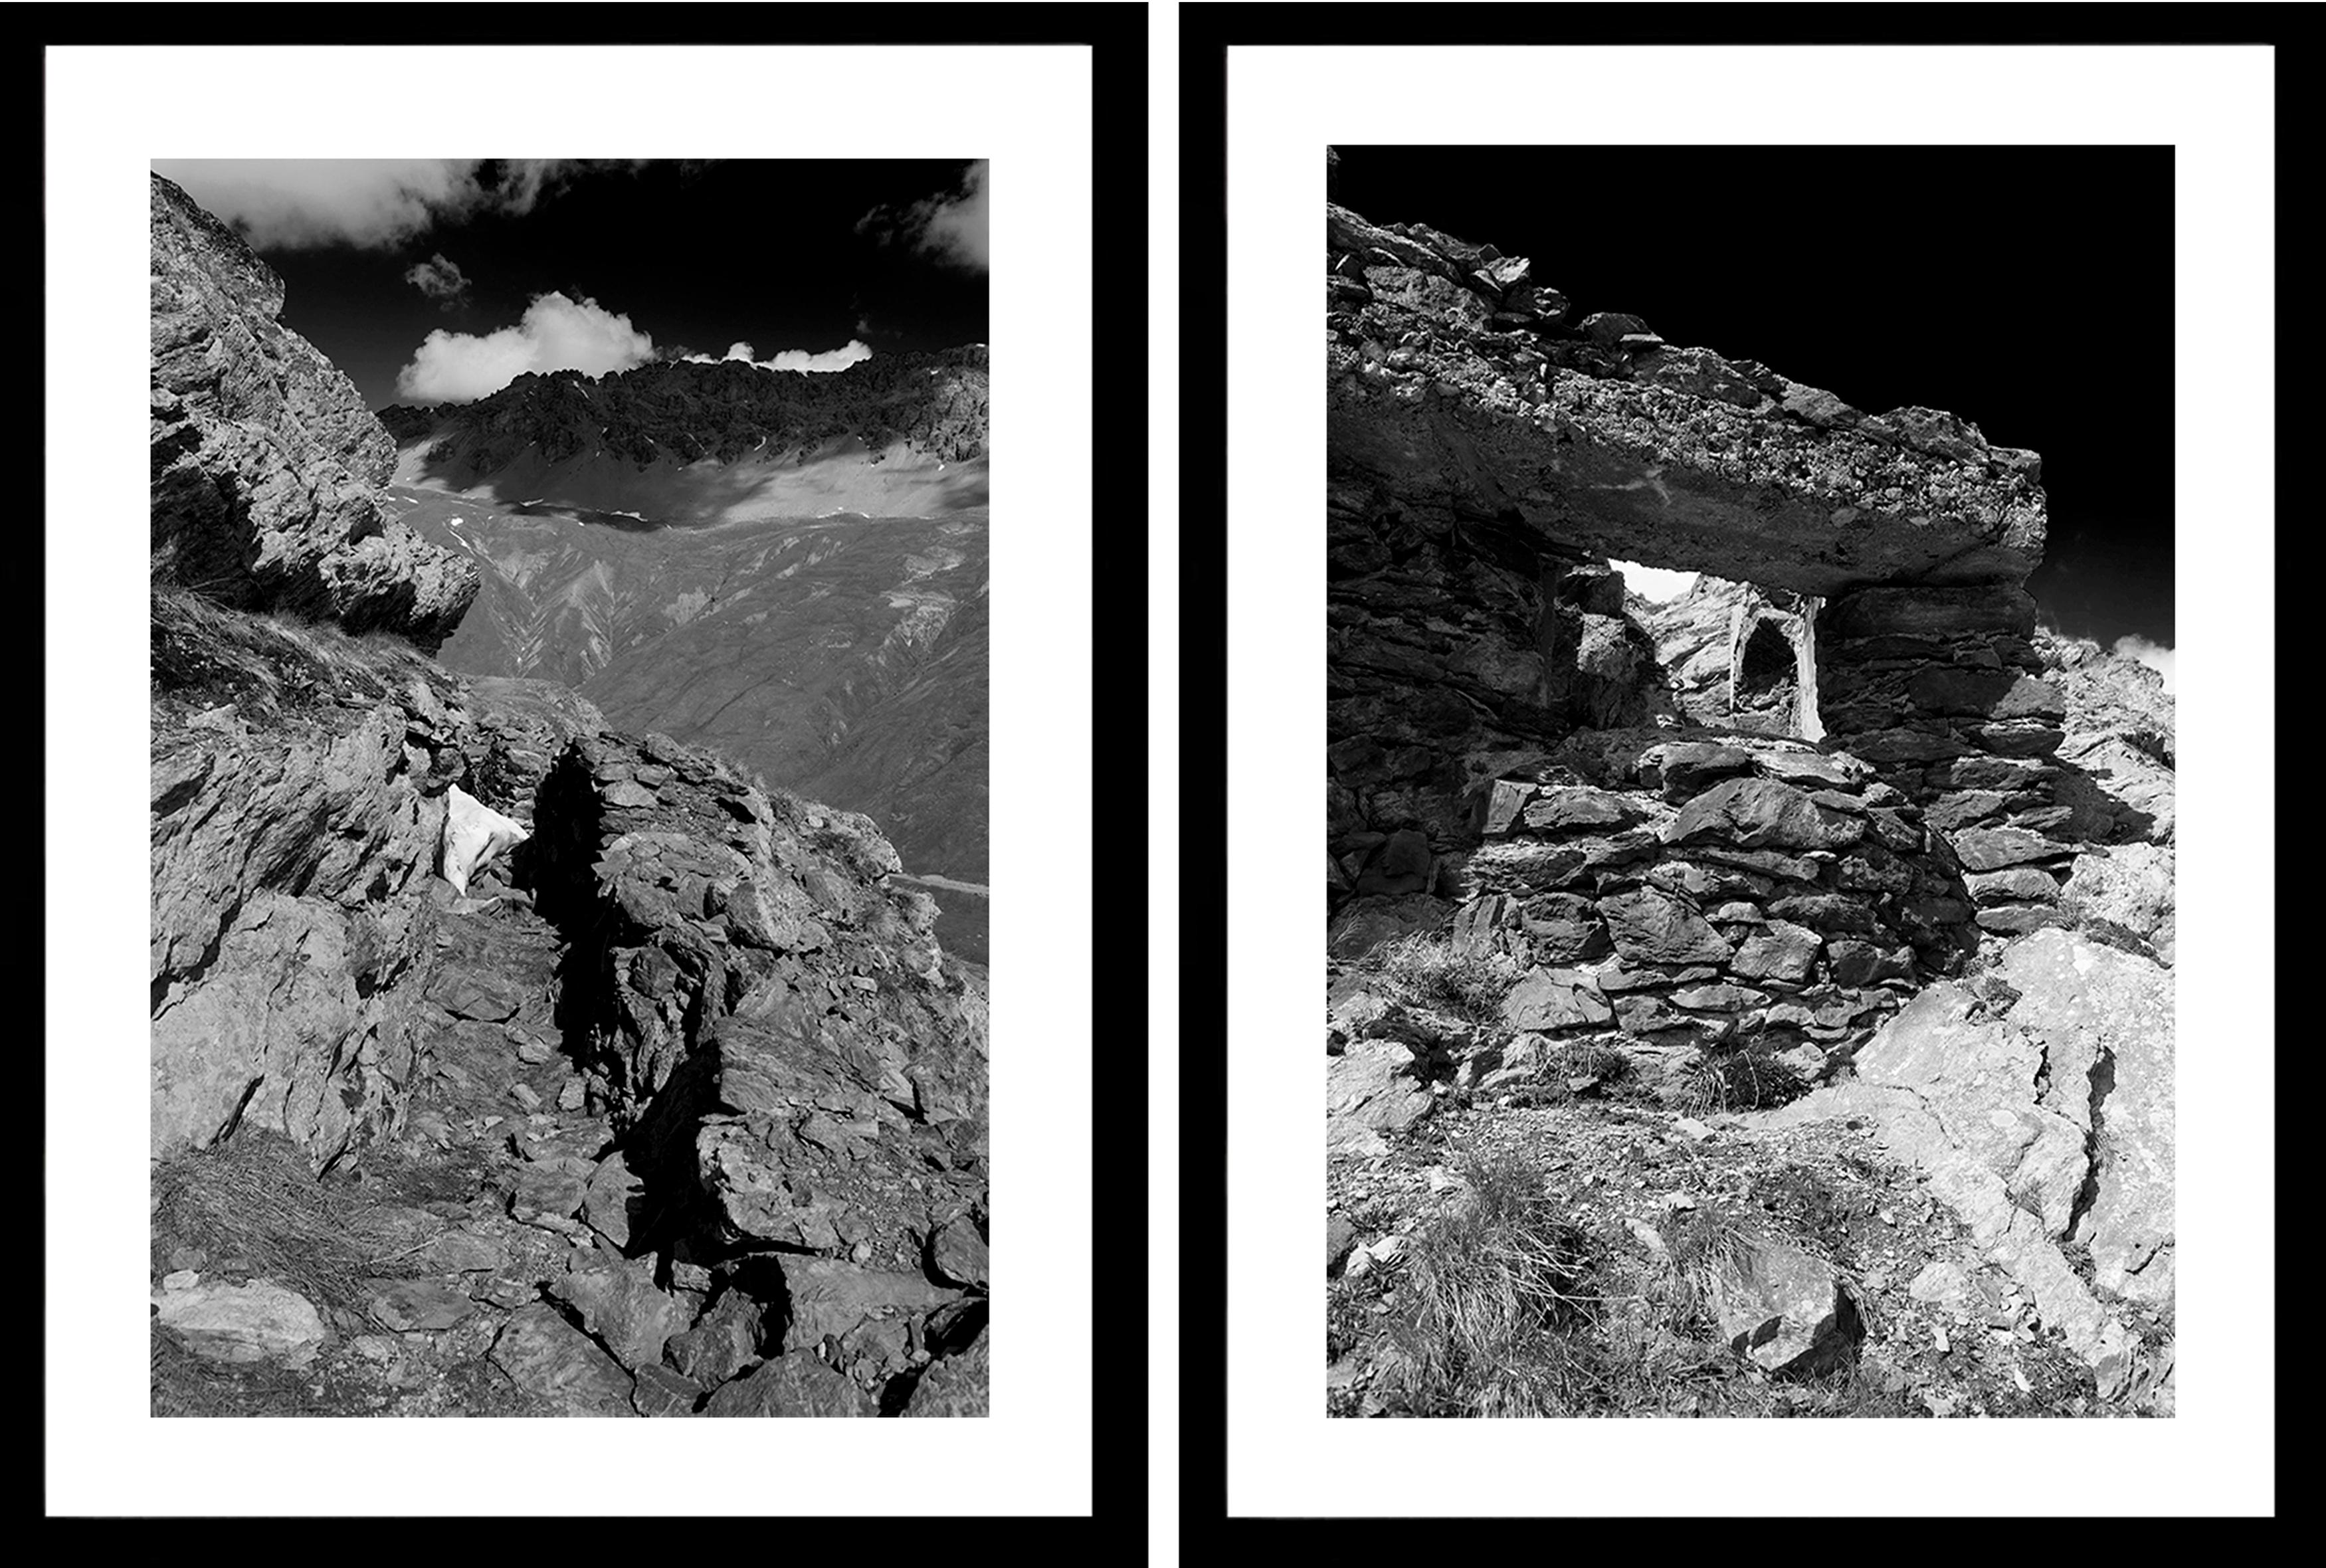 Luca Artioli Landscape Photograph - A Fatal Pass, trenches in the Italian Alps, Diptych. Landscape B&W photograph